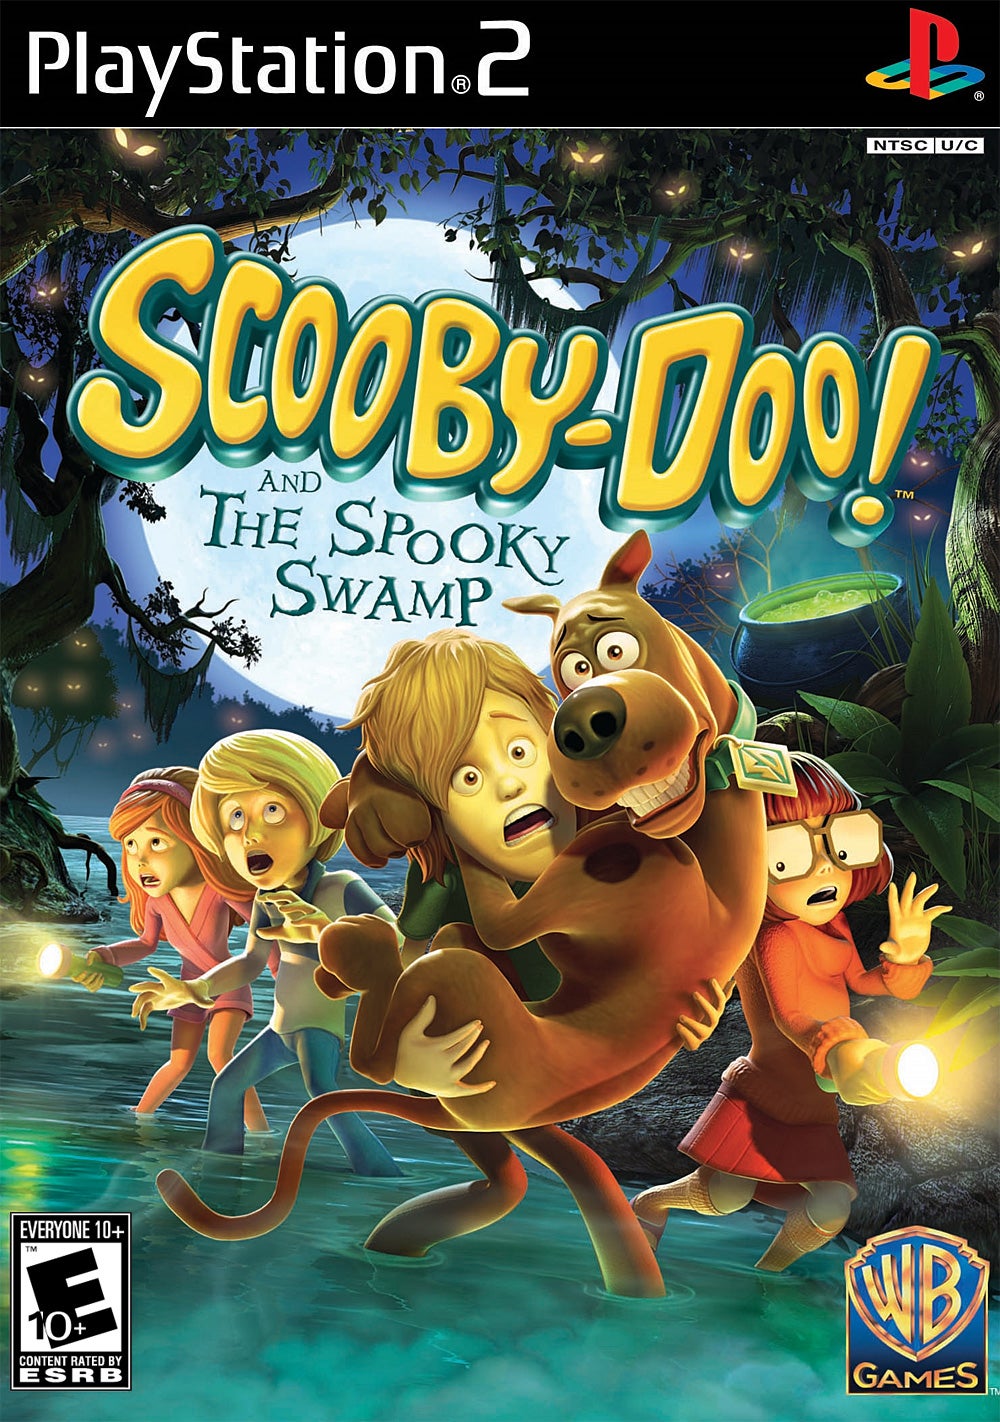 PS2 - Scooby-Doo and the spooky swamp | All Aboard Games